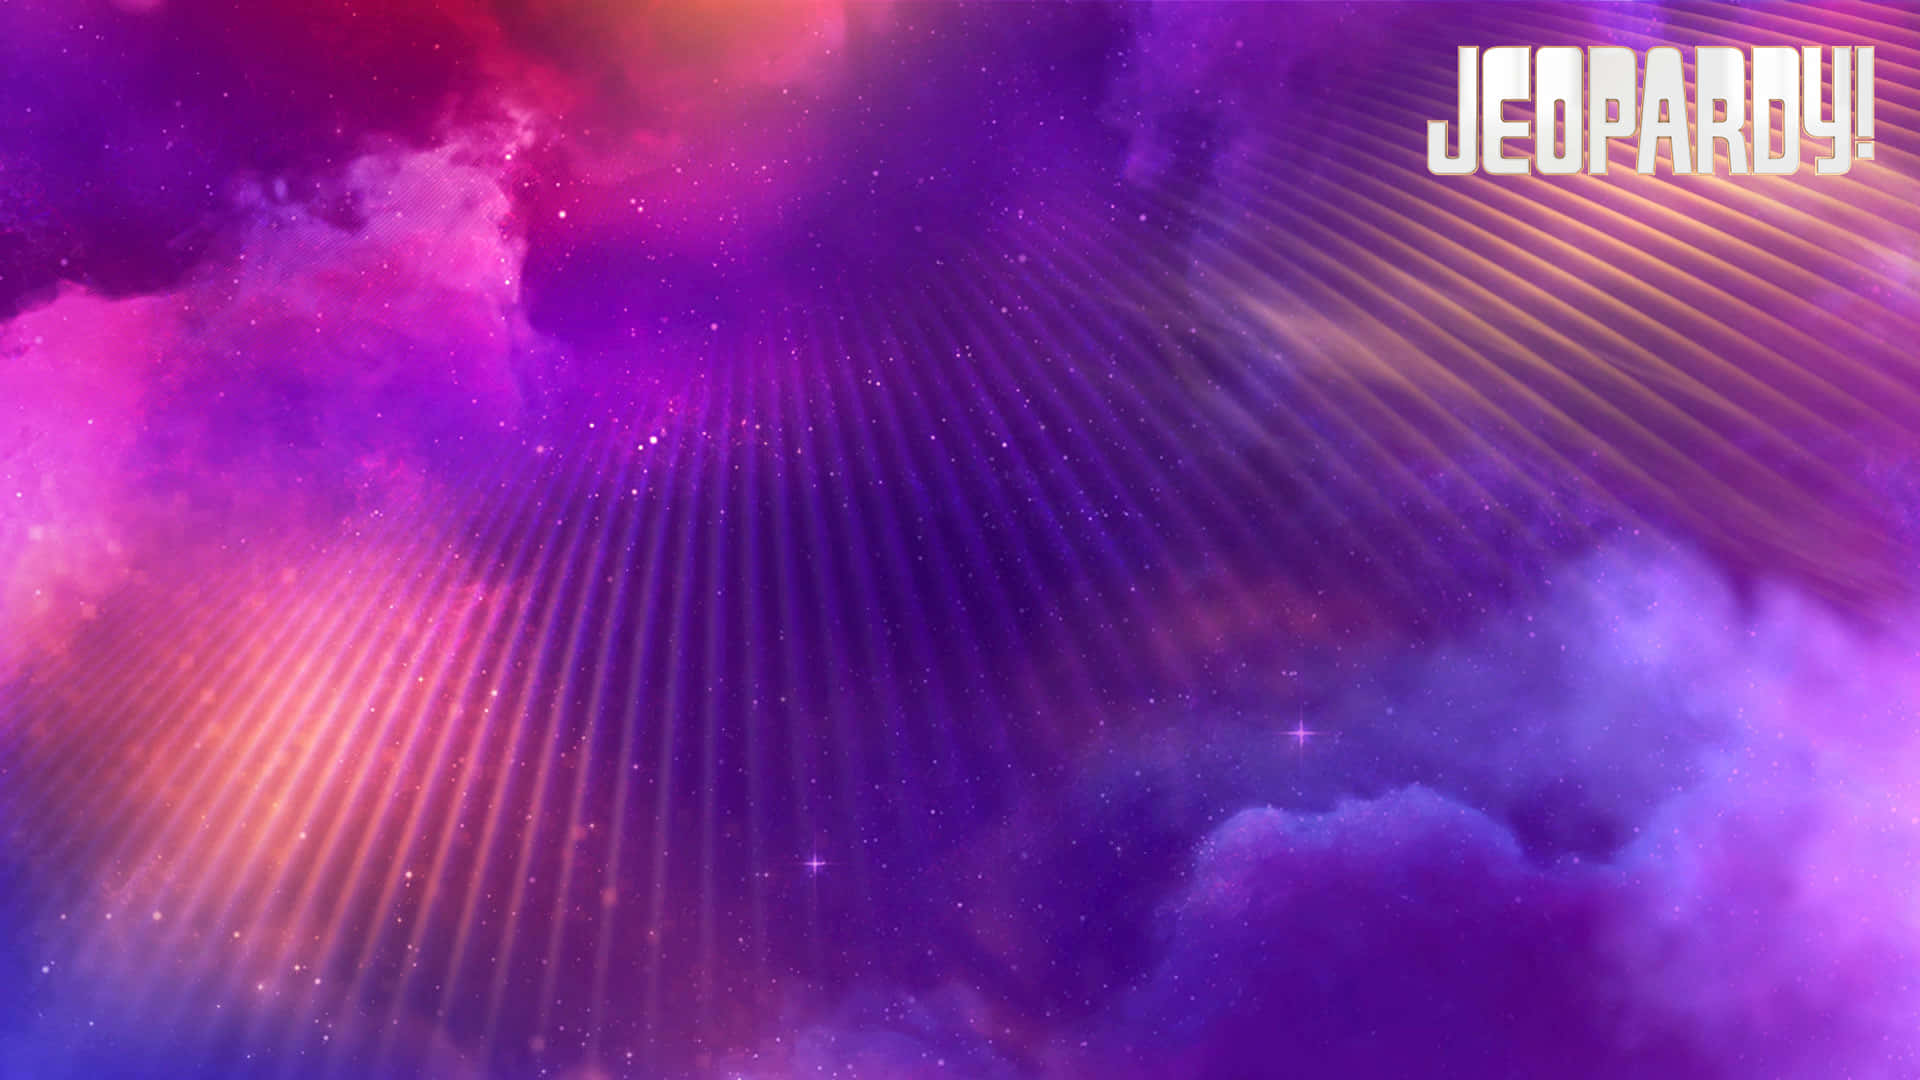 A Purple And Pink Background With The Words Jenny